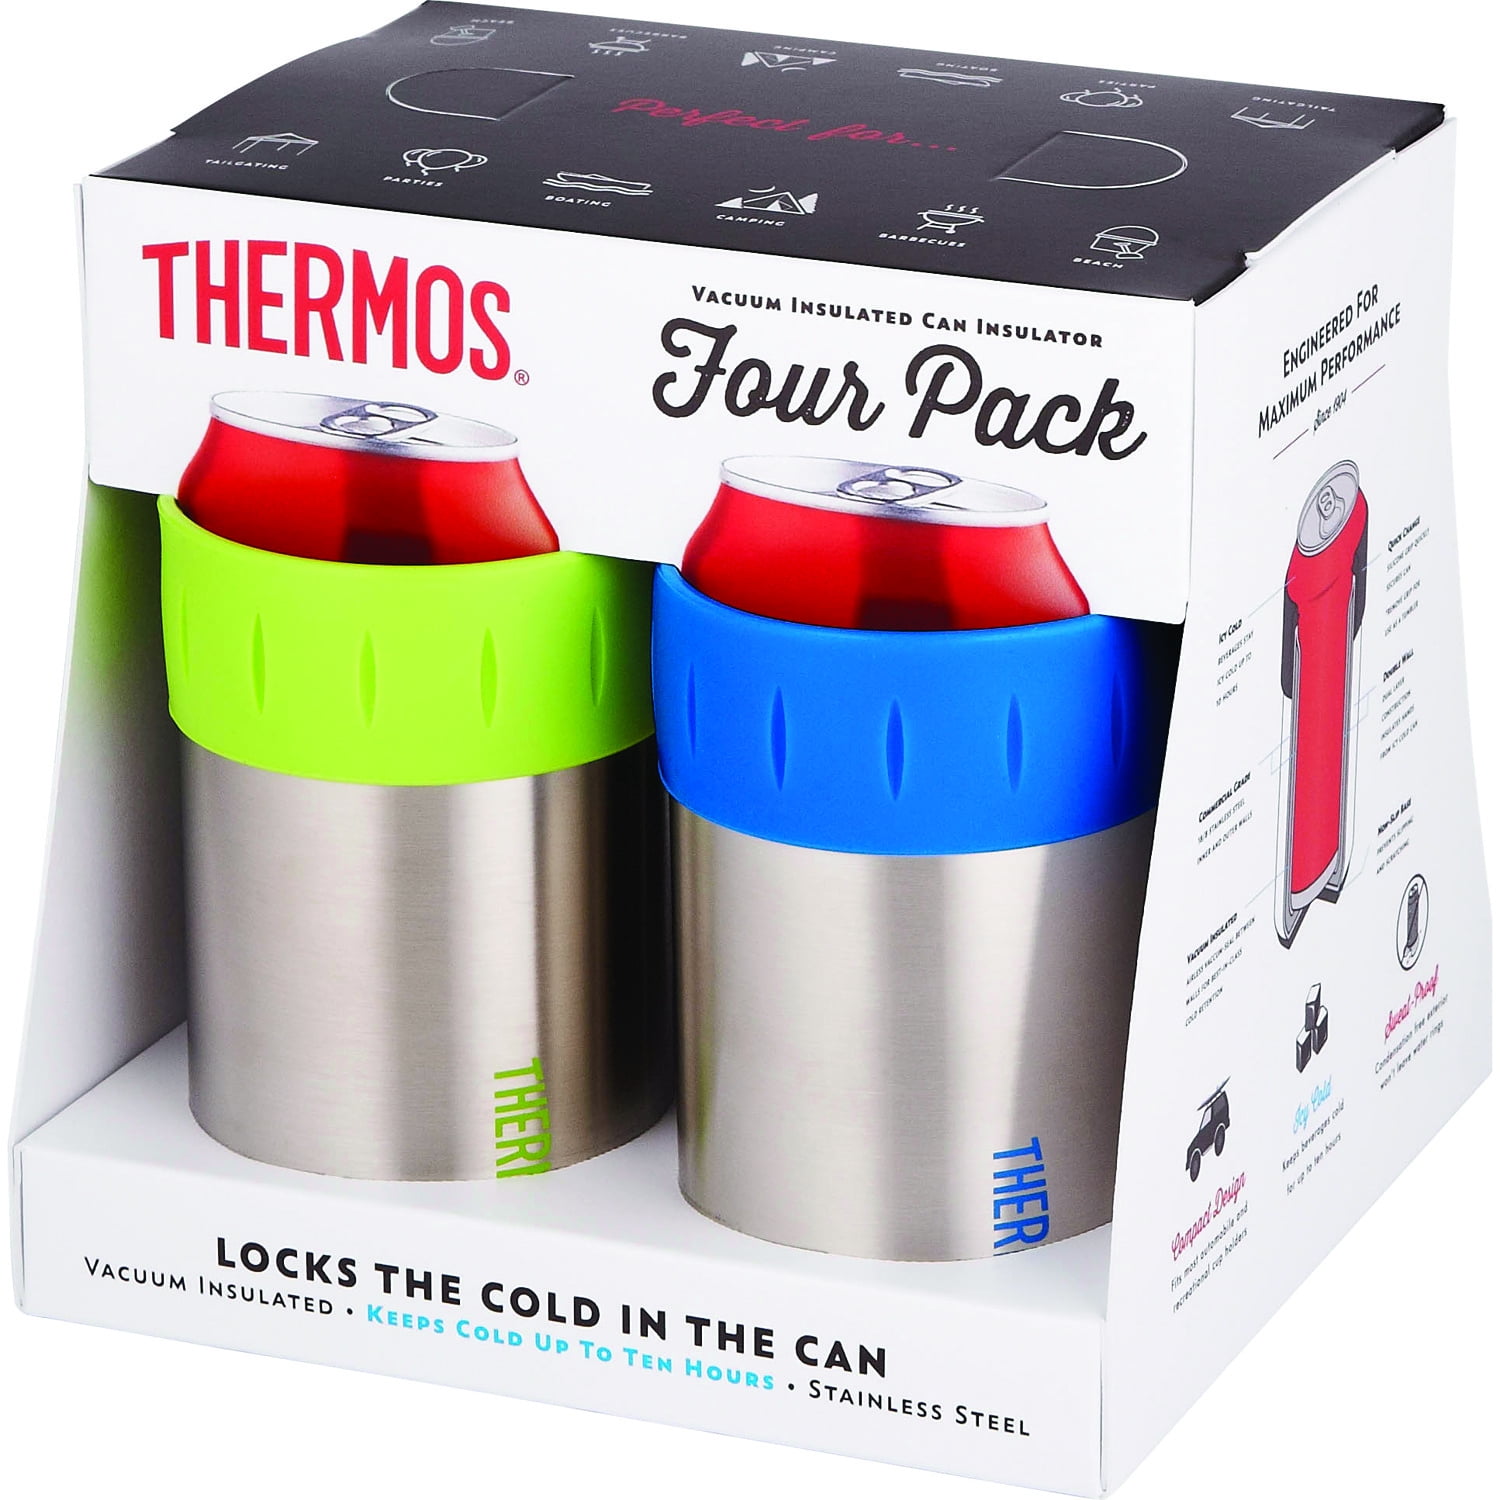 Thermos 2700ARP4 12-Ounce Stainless Steel Beverage Can Insulators, 4 pk